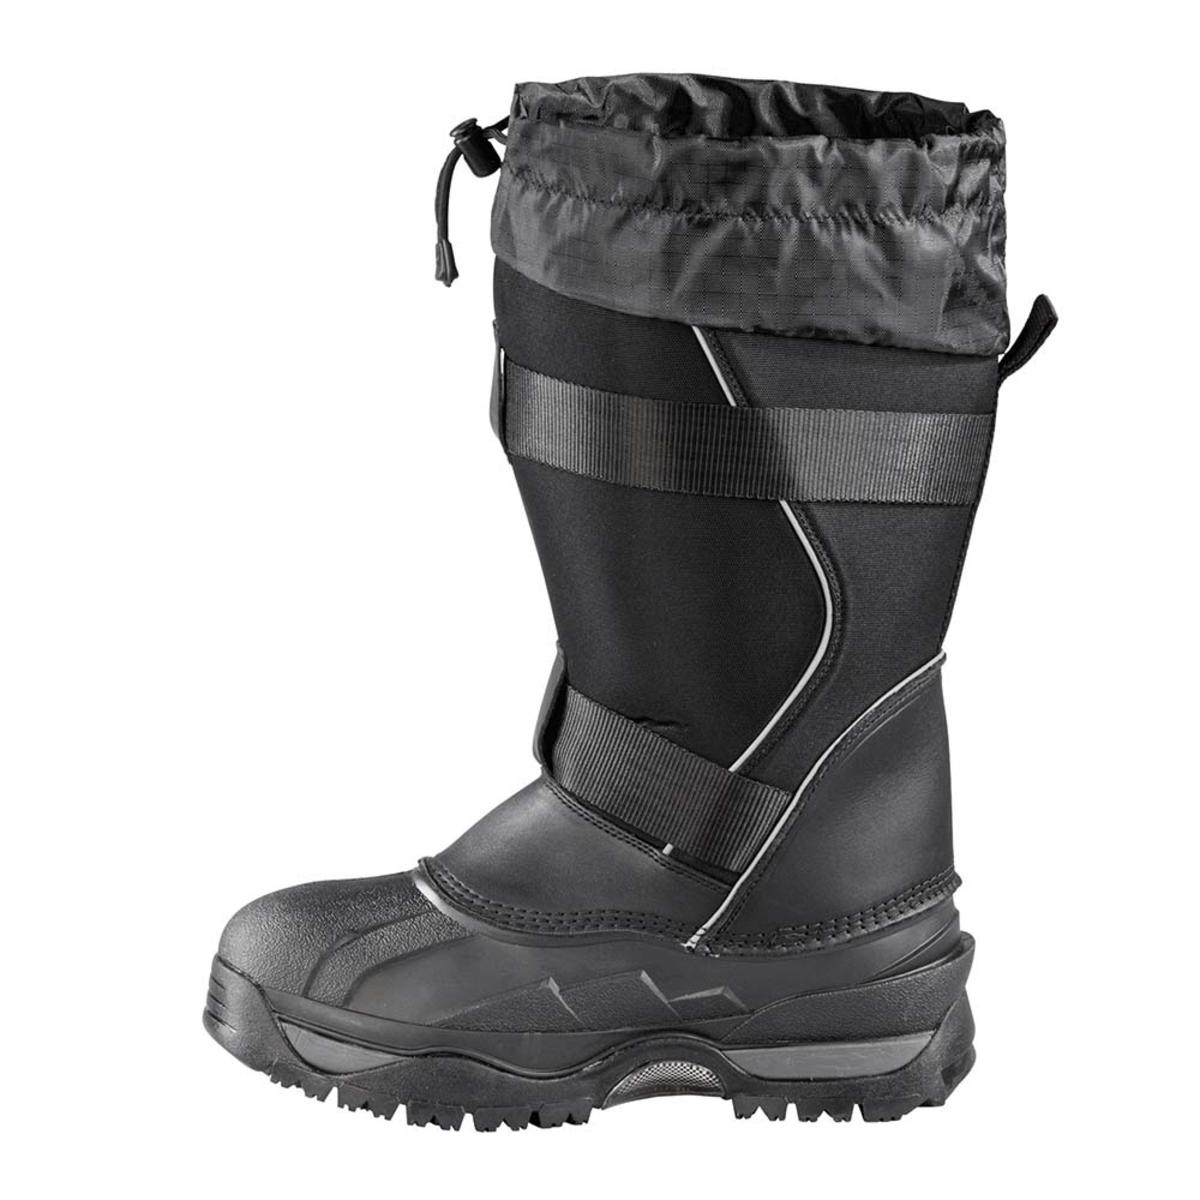 Baffin  4000-0048-001-12; Impact Boots Black Size 12 - image 4 of 7